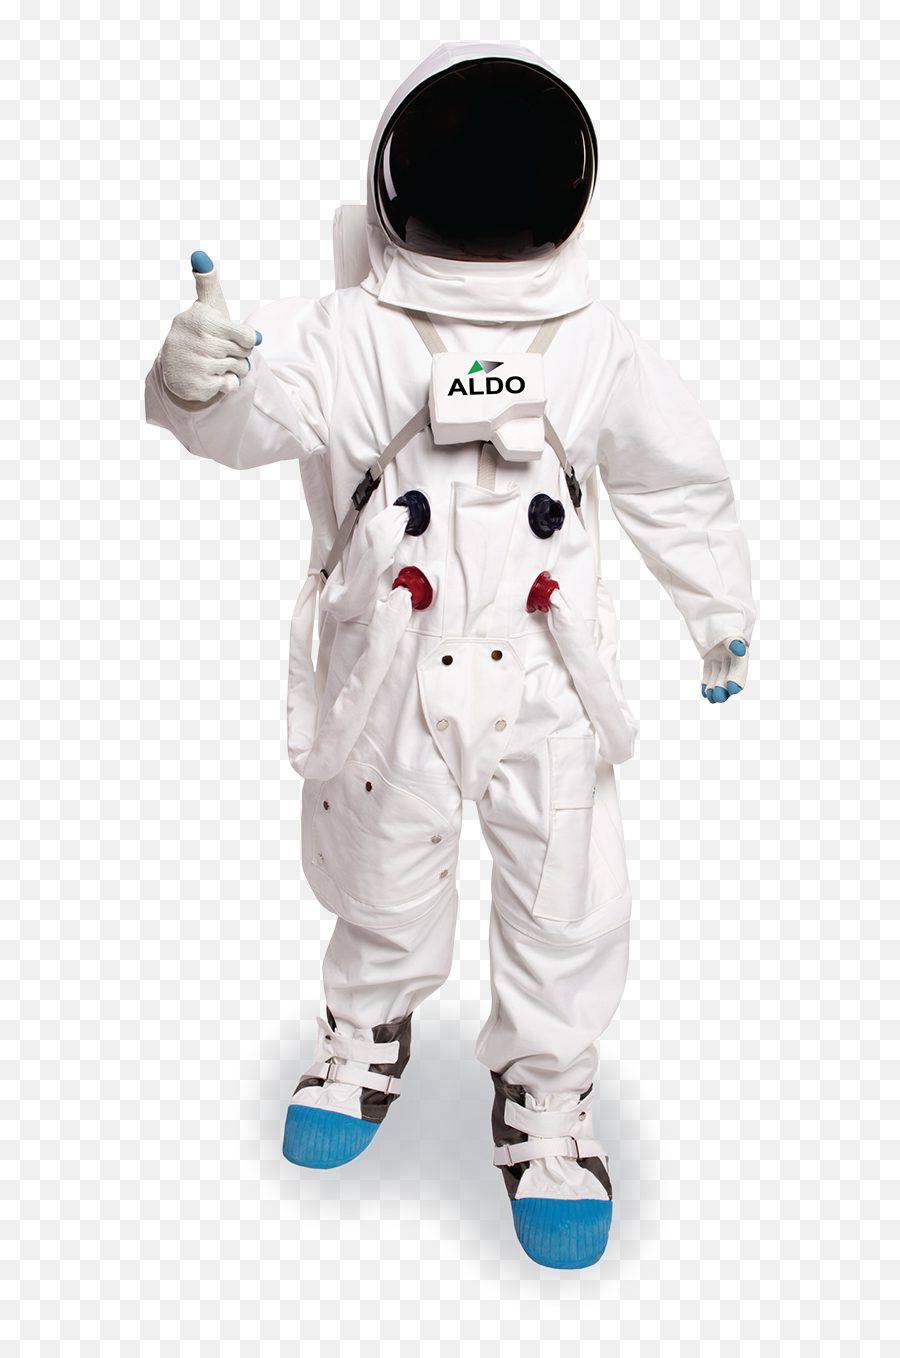 Download Astronaut Png Image For Free - Astronaut Png Emoji,Astronaut Transparent